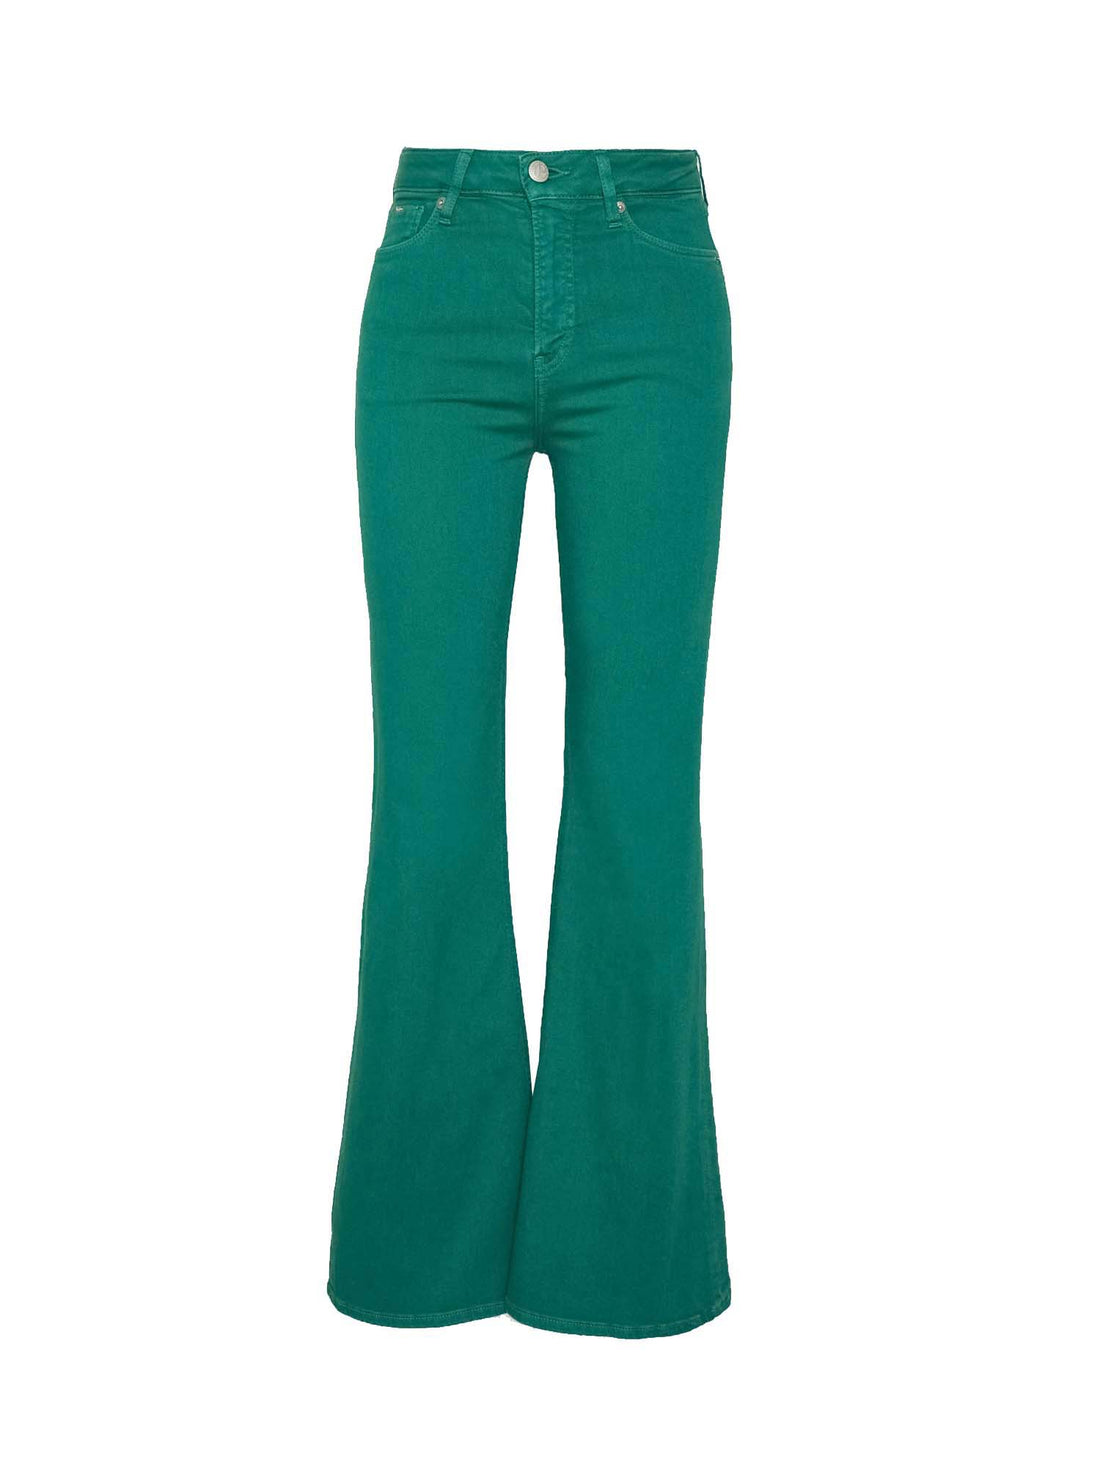 Jeans Verde Pepe Jeans